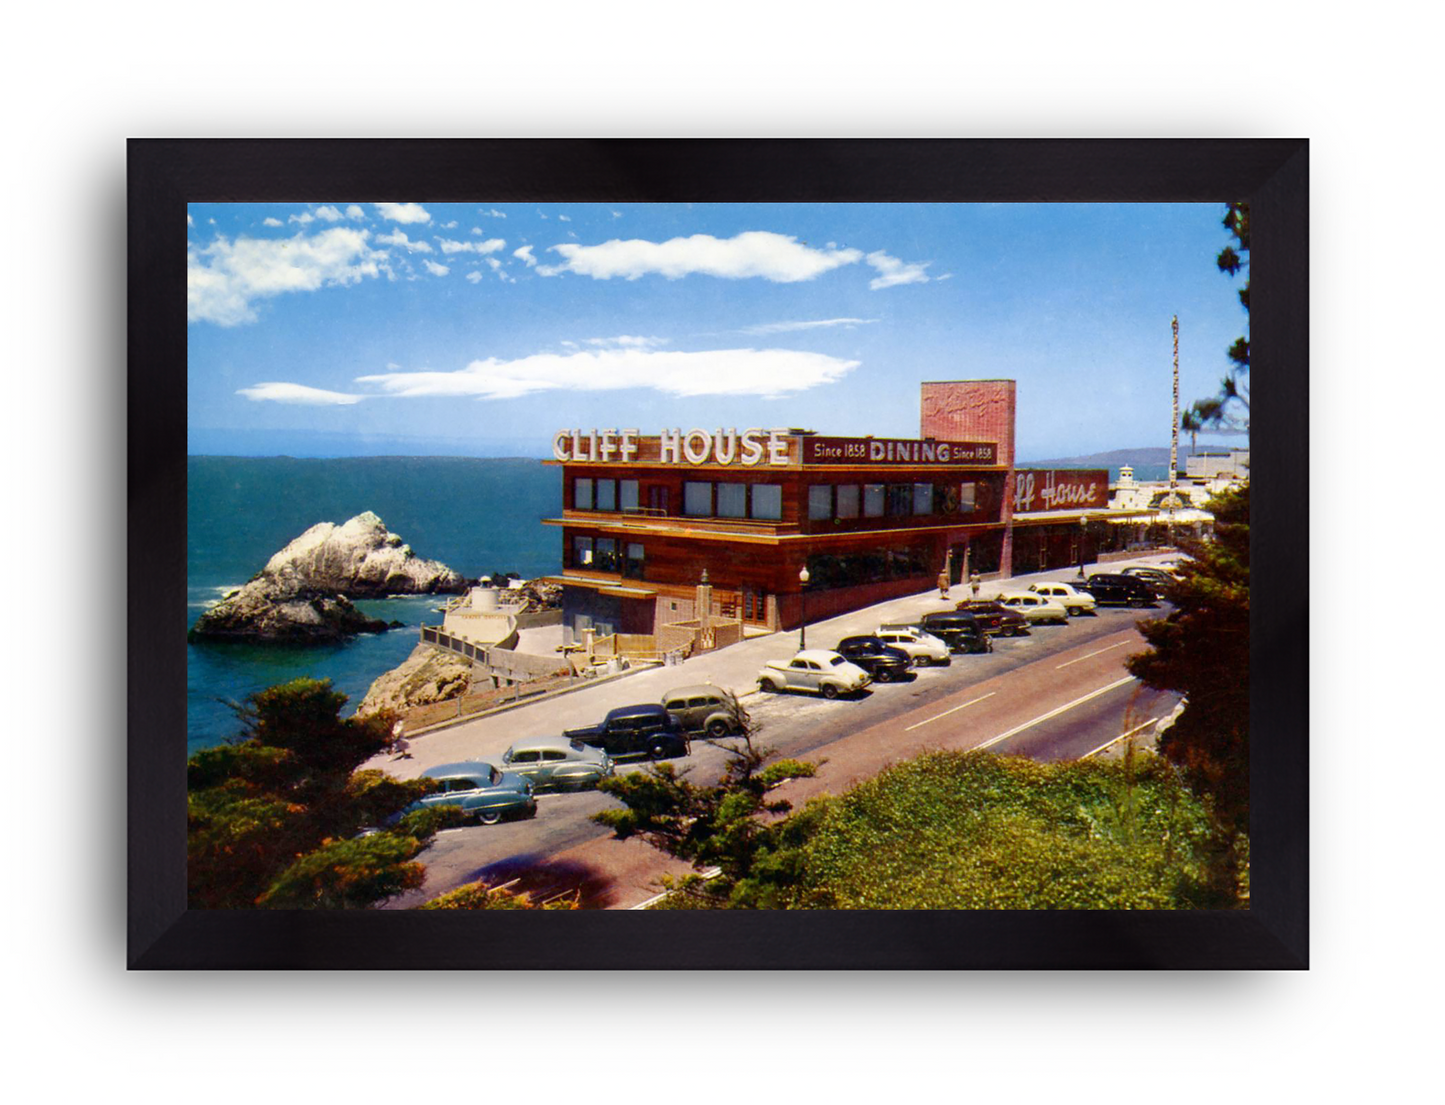 Cliff House, 1950s